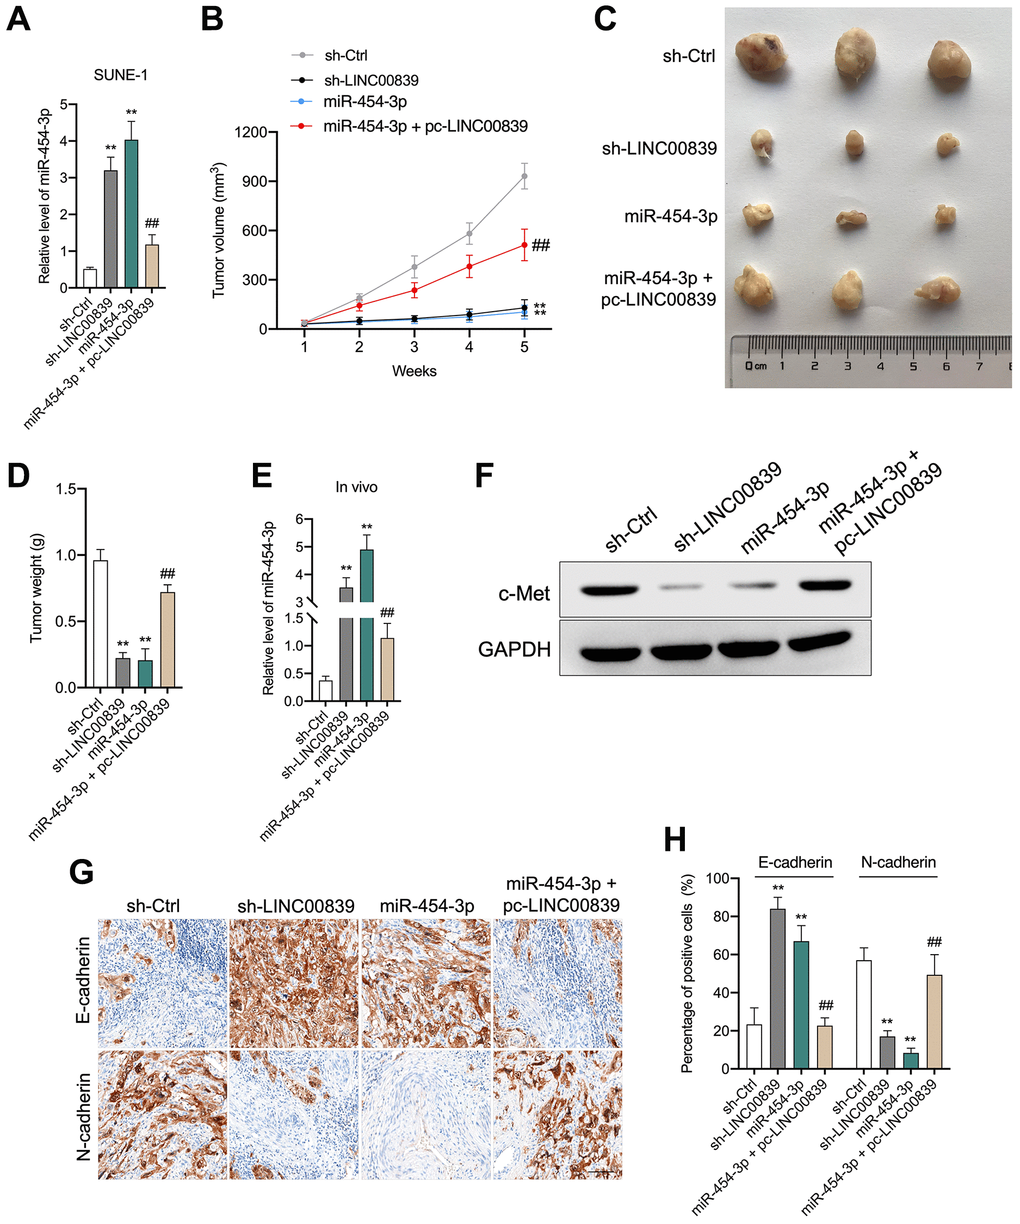 LINC00839 knockdown suppresses tumor growth in vivo. (A) SUNE-1 cells were transected with sh-LINC00839, or miR-454-3p mimic or co-transfected with miR-454-3p mimic and pc-LINC00839, the level was miR-454-3p was assessed by qPCR. (B) SNUE-1 cells were xenogenic transplanted into nude mice (n = 3). Tumor volumes were measured every week and the growth curve of xenograft tumors was drawn. (C) Representative images of xenograft tumors. (D) Tumor weight. (E) Expression levels of miR-454-3p in xenograft tumors were determined by qPCR. (F) Expression level of c-Met in xenograft tumors was determined by western blot. (G, H) Protein levels of E-cadherin and N-cadherin were examined by immunohistochemical staining. **P ##P 